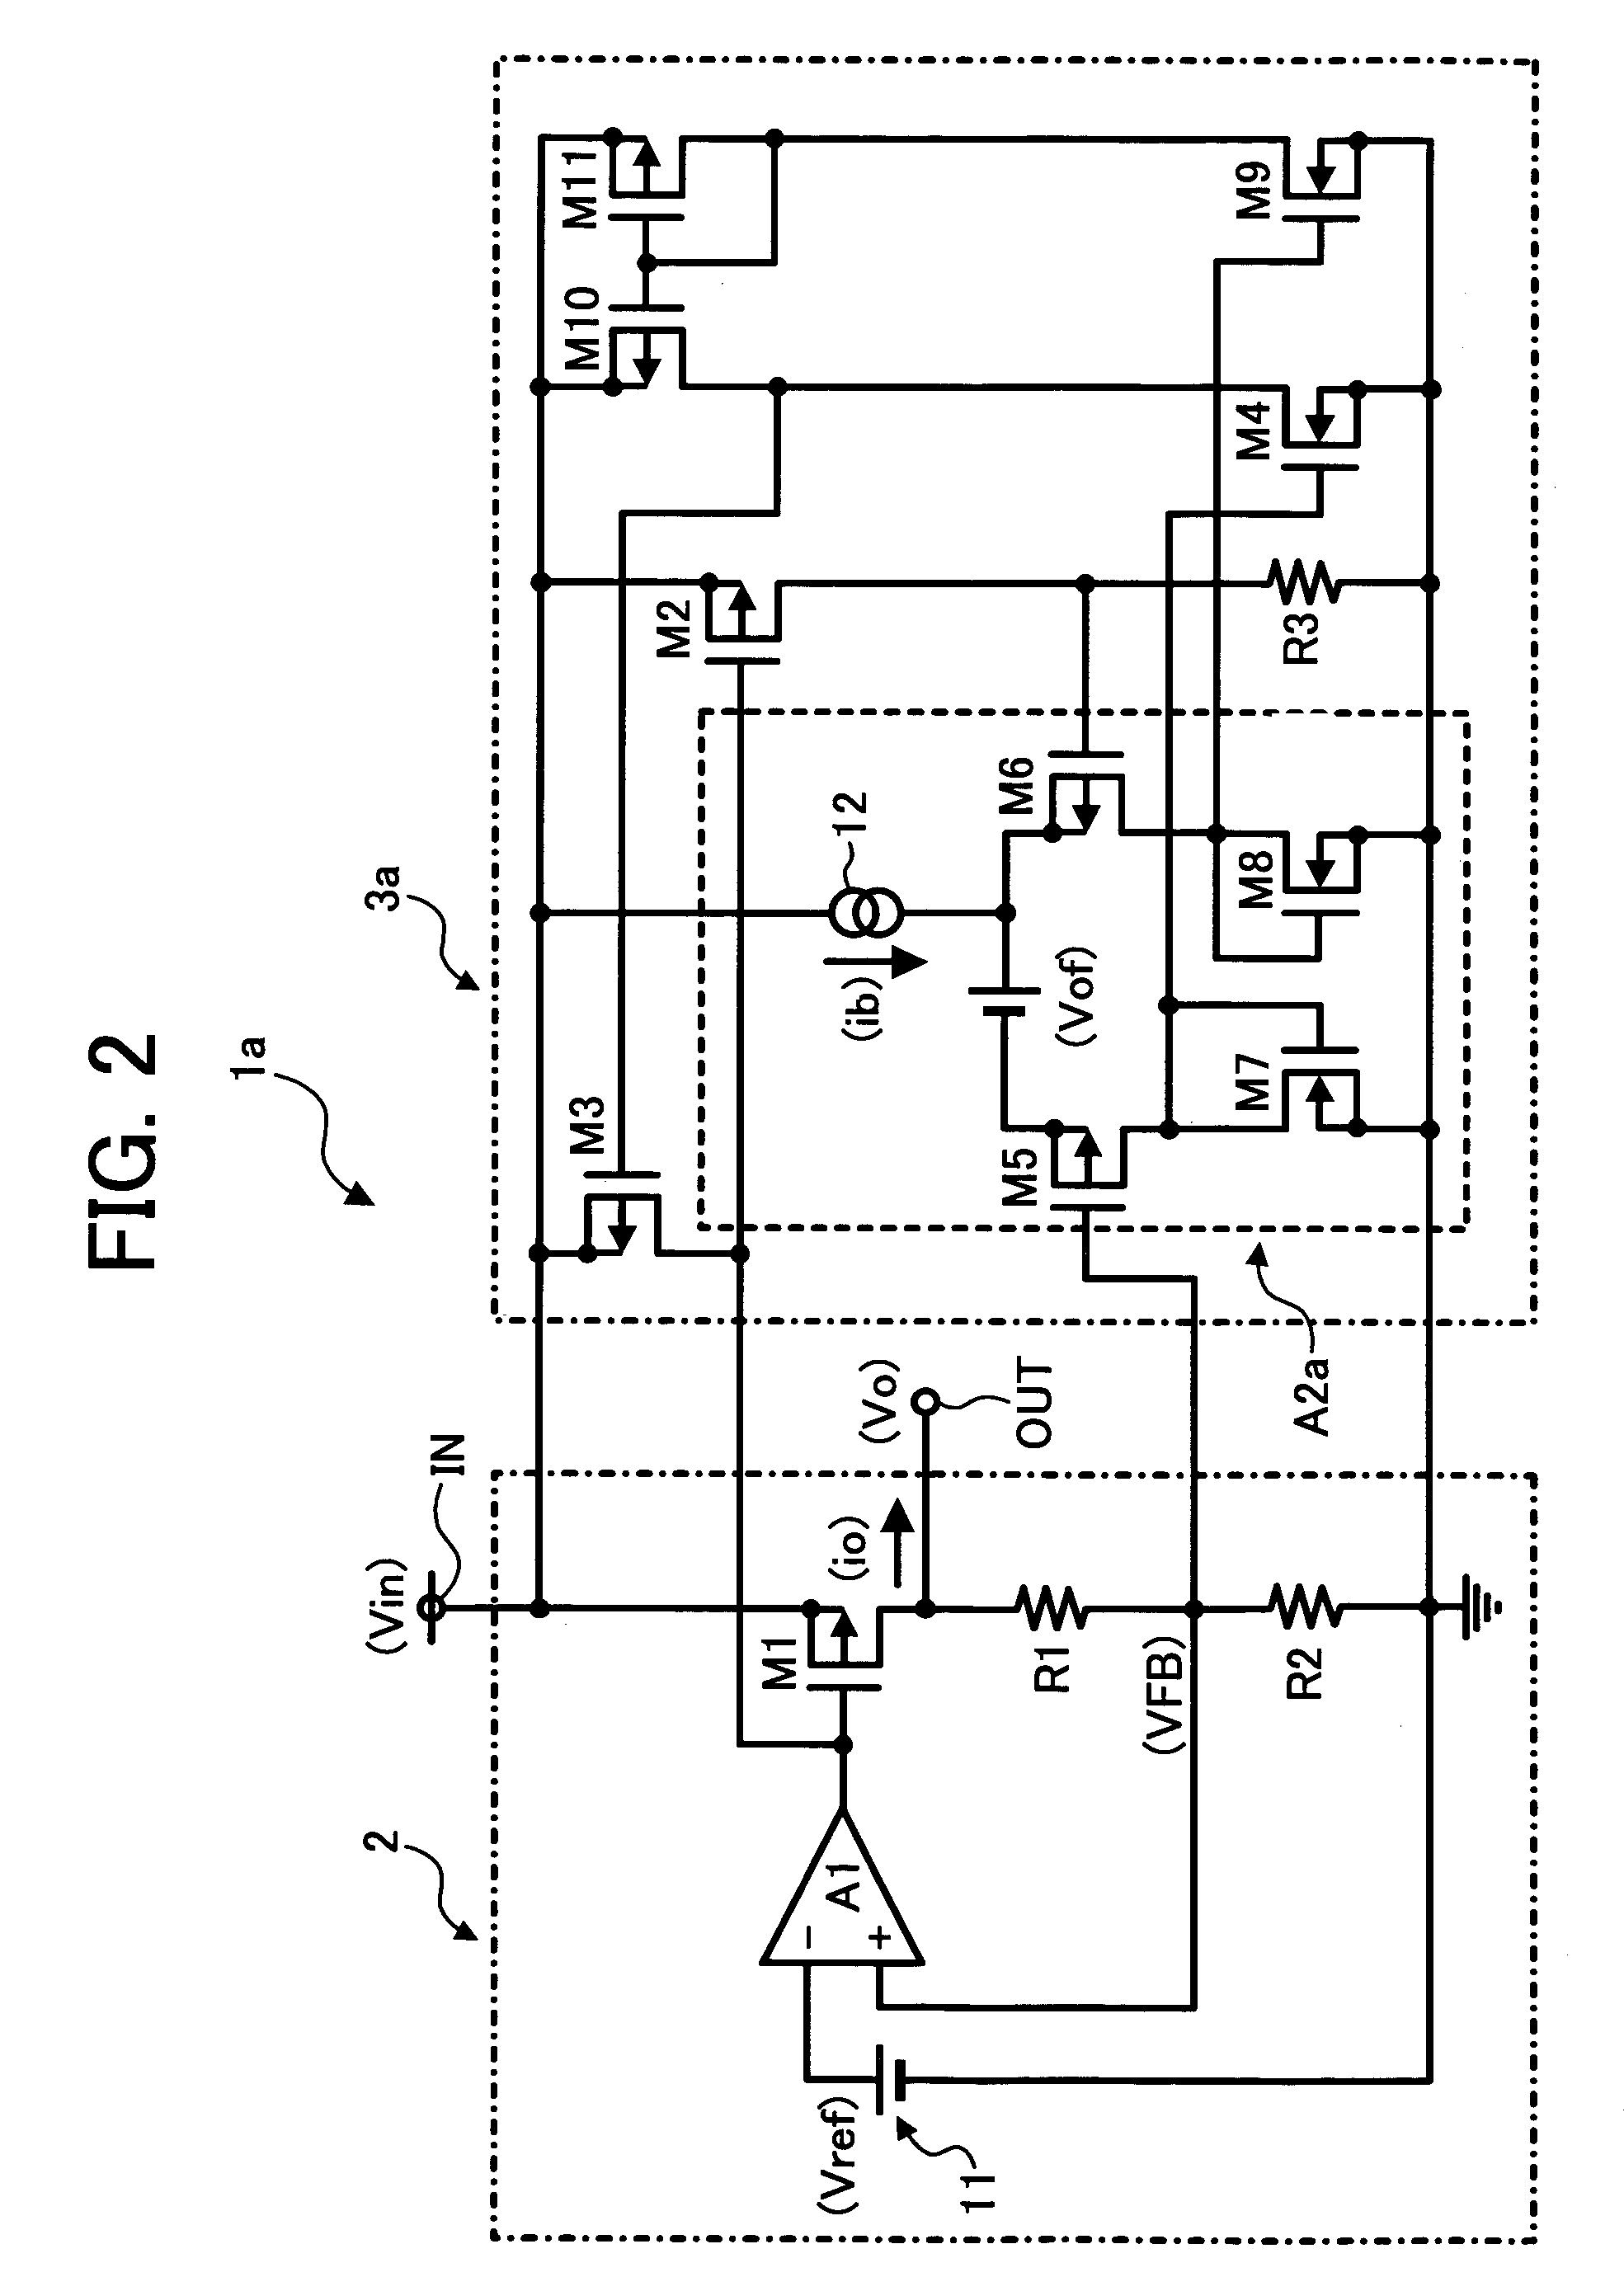 Constant-voltage power circuit with fold back current limiting capability